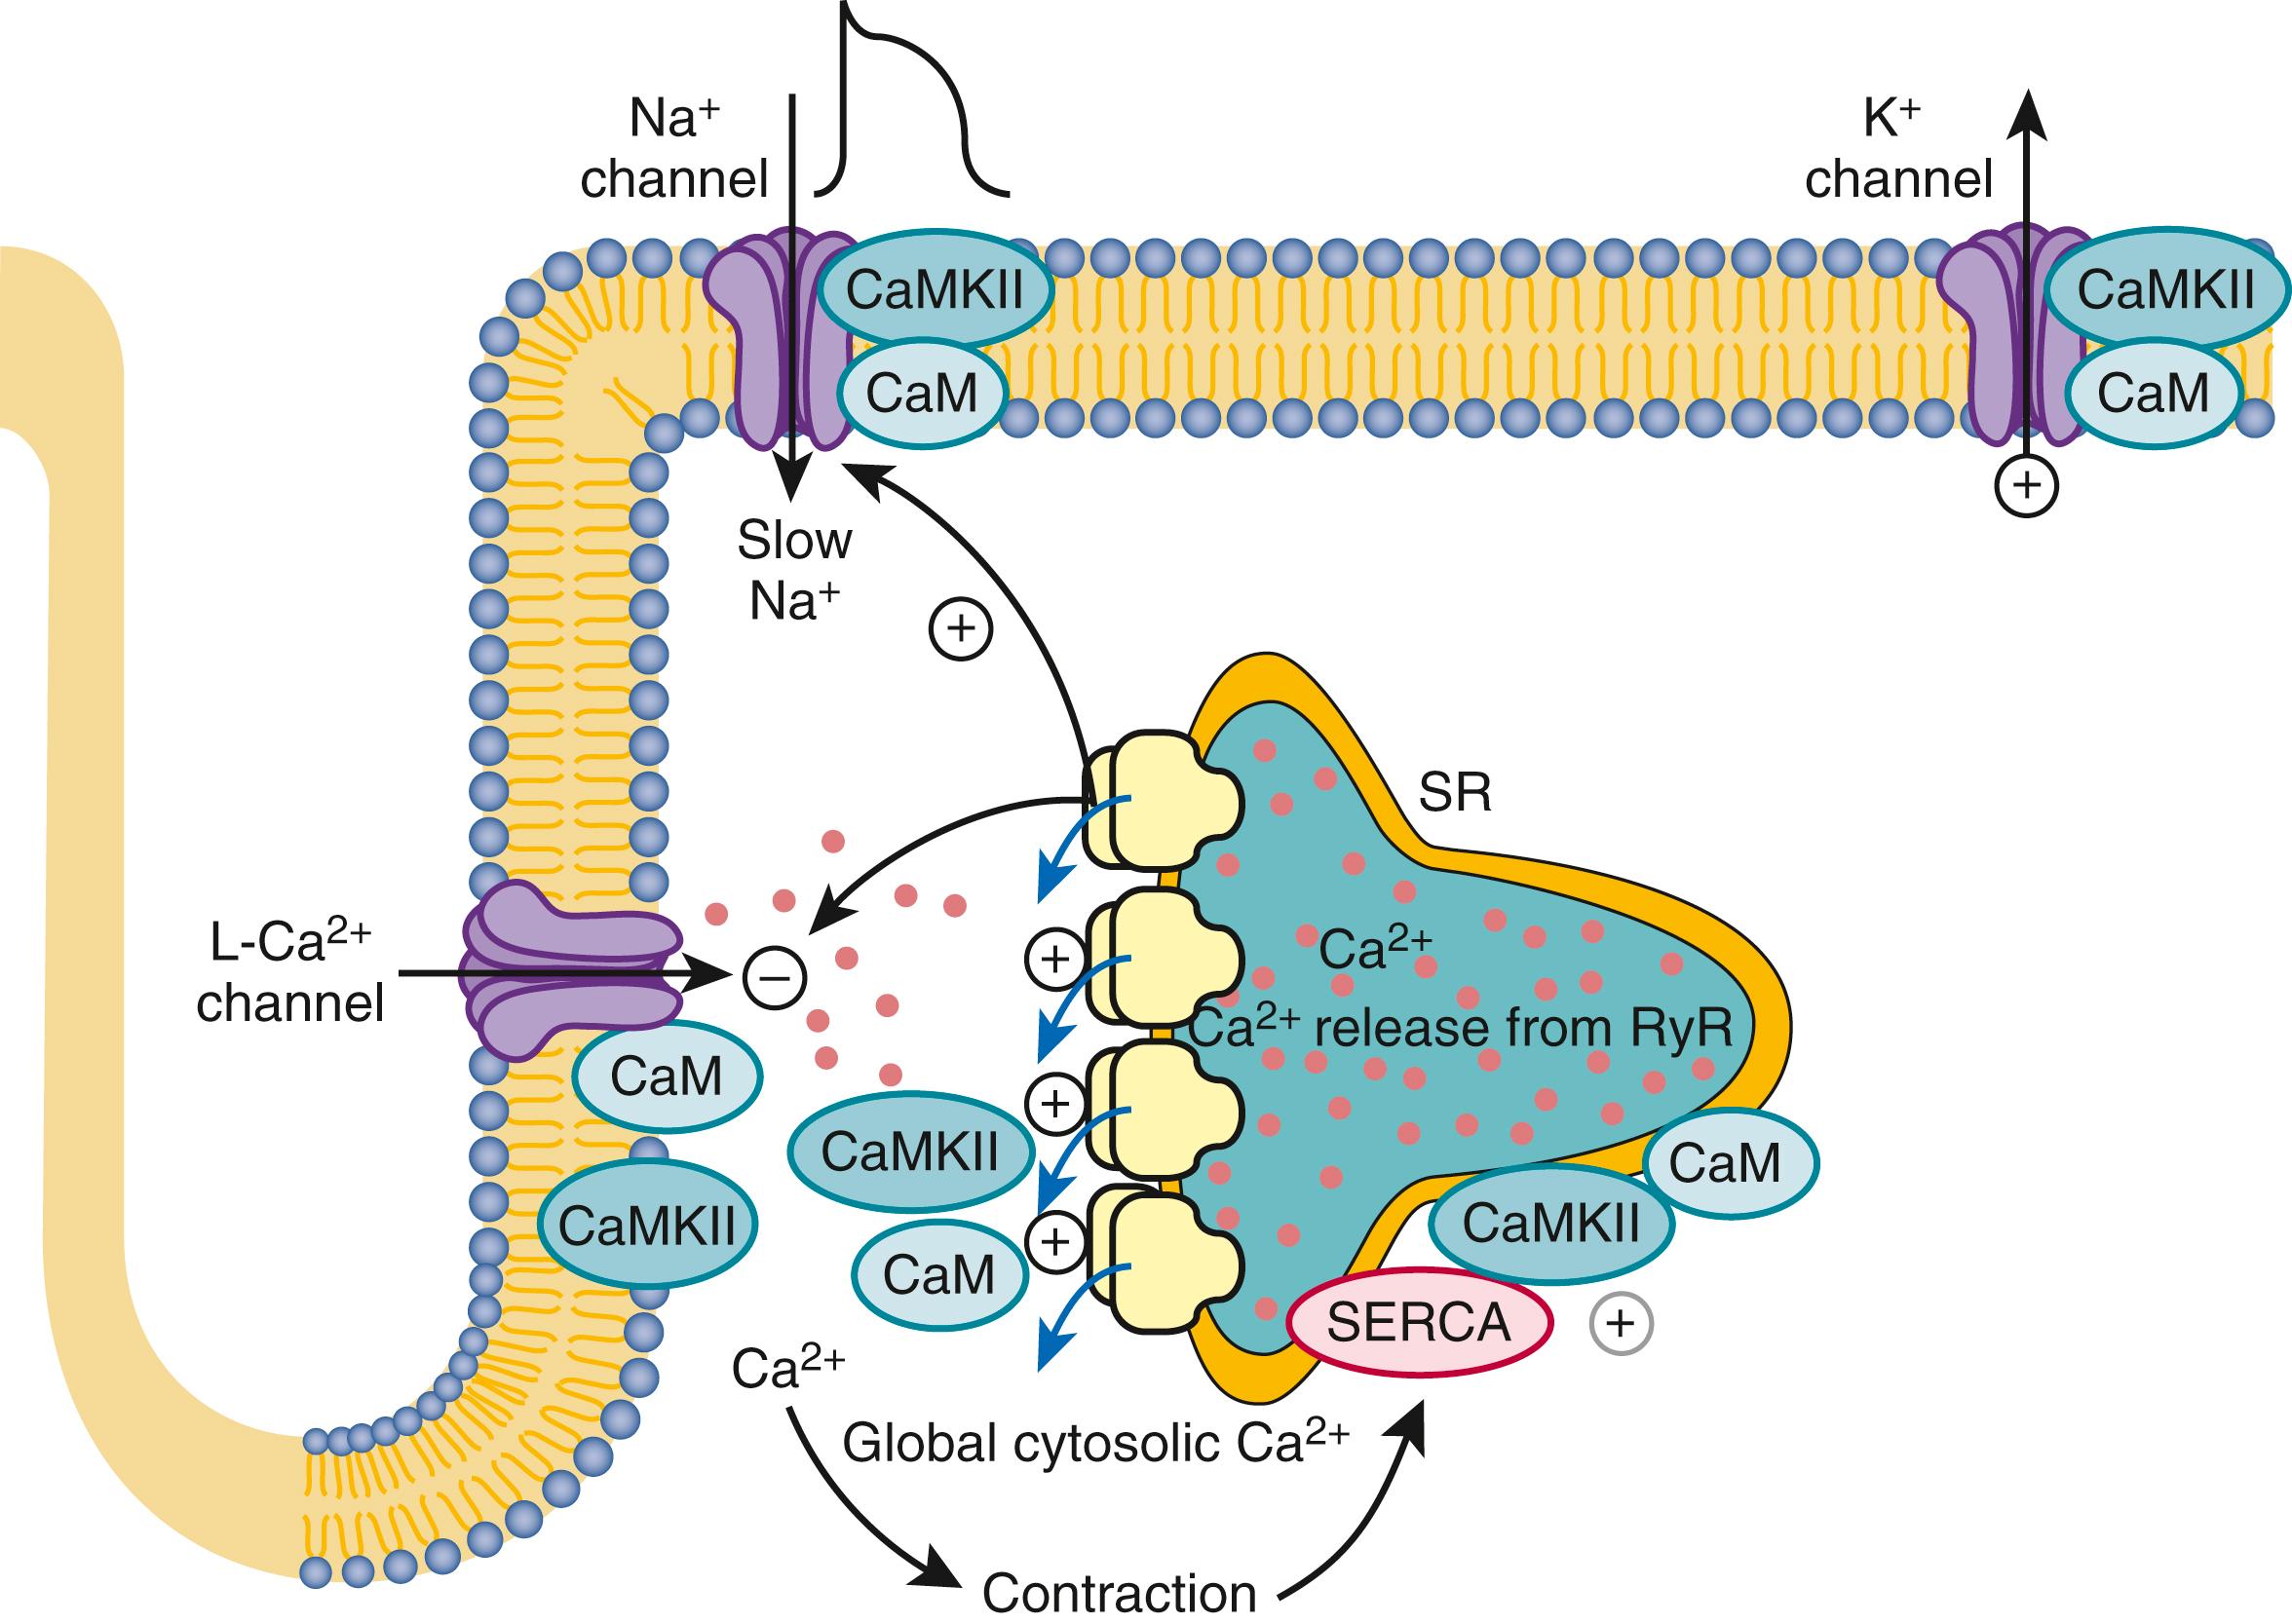 FIGURE 46.9, Role of CaM and CaMKII in regulating intracellular [Ca 2+ ]. The rising cytosolic Ca 2+ concentration in systole activates the Ca 2+ regulatory system whereby Ca 2+ -CaM causes inactivation of L-type Ca 2+ current and RyR release. This negative feedback system limits cellular Ca 2+ gain. The effects of CaMKII can also modulate these systems. 22 For example, (1) CaMKII limits the extent of Ca 2+ -dependent inactivation and enhances Ca 2+ current amplitude, (2) it increases the fraction of SR Ca 2+ released from the RyR in response to the Ca 2+ current trigger (which can be arrhythmogenic), (3) it phosphorylates PLB to enhance SR Ca 2+ uptake by SERCA, and (4) it can modulate Na + and K + channel gating in ways that are also proarrhythmic. 22 , 23